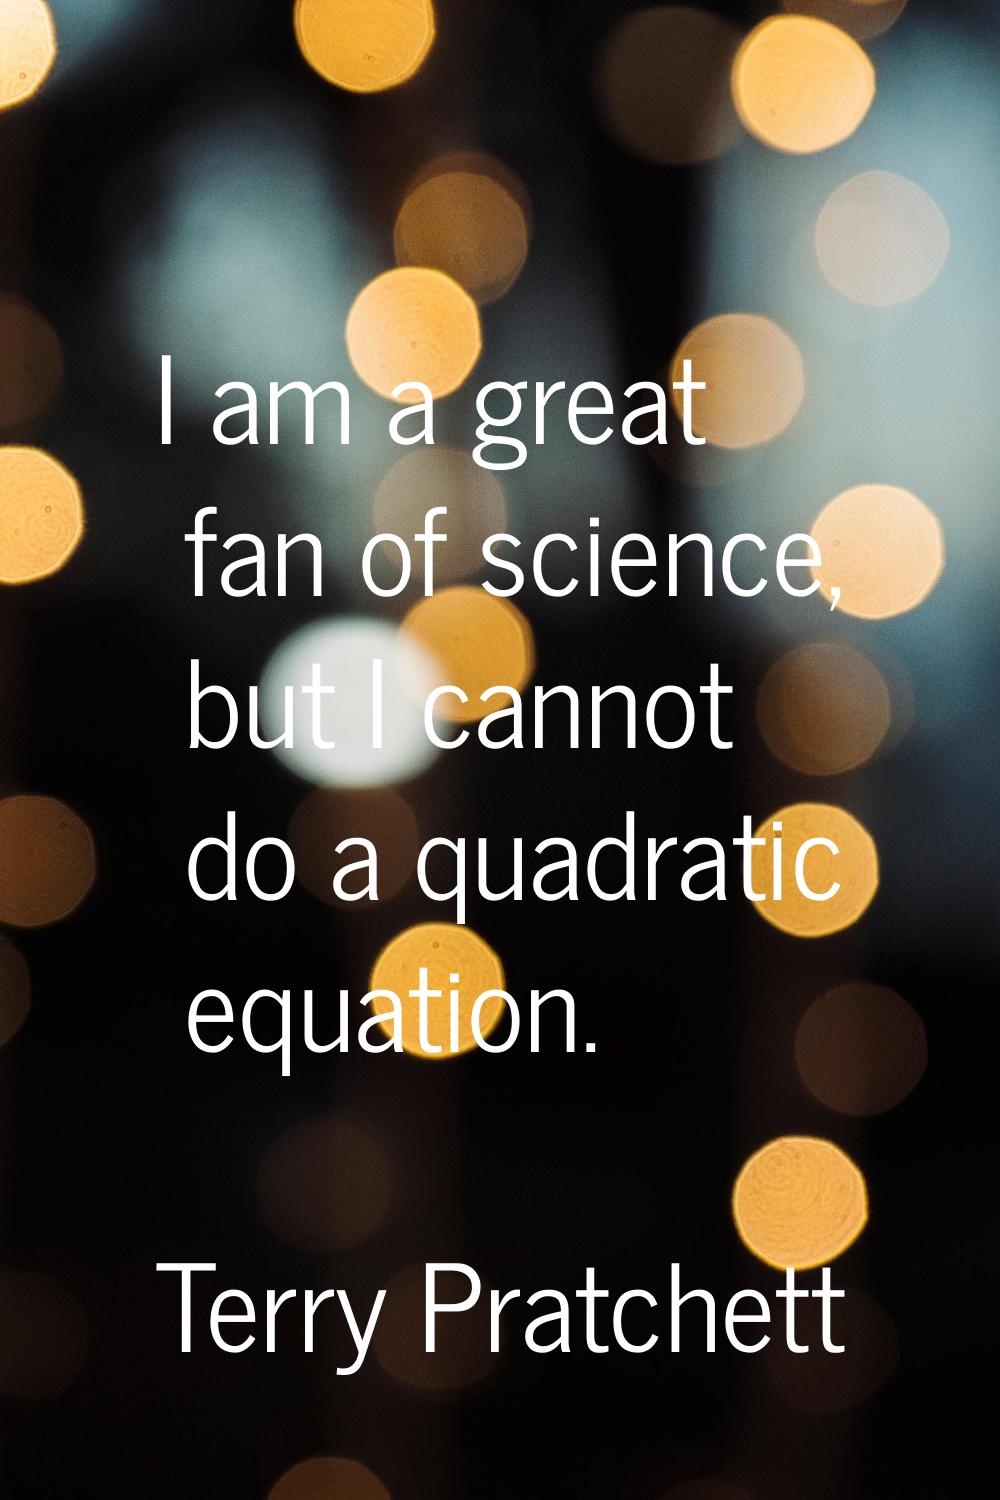 I am a great fan of science, but I cannot do a quadratic equation.